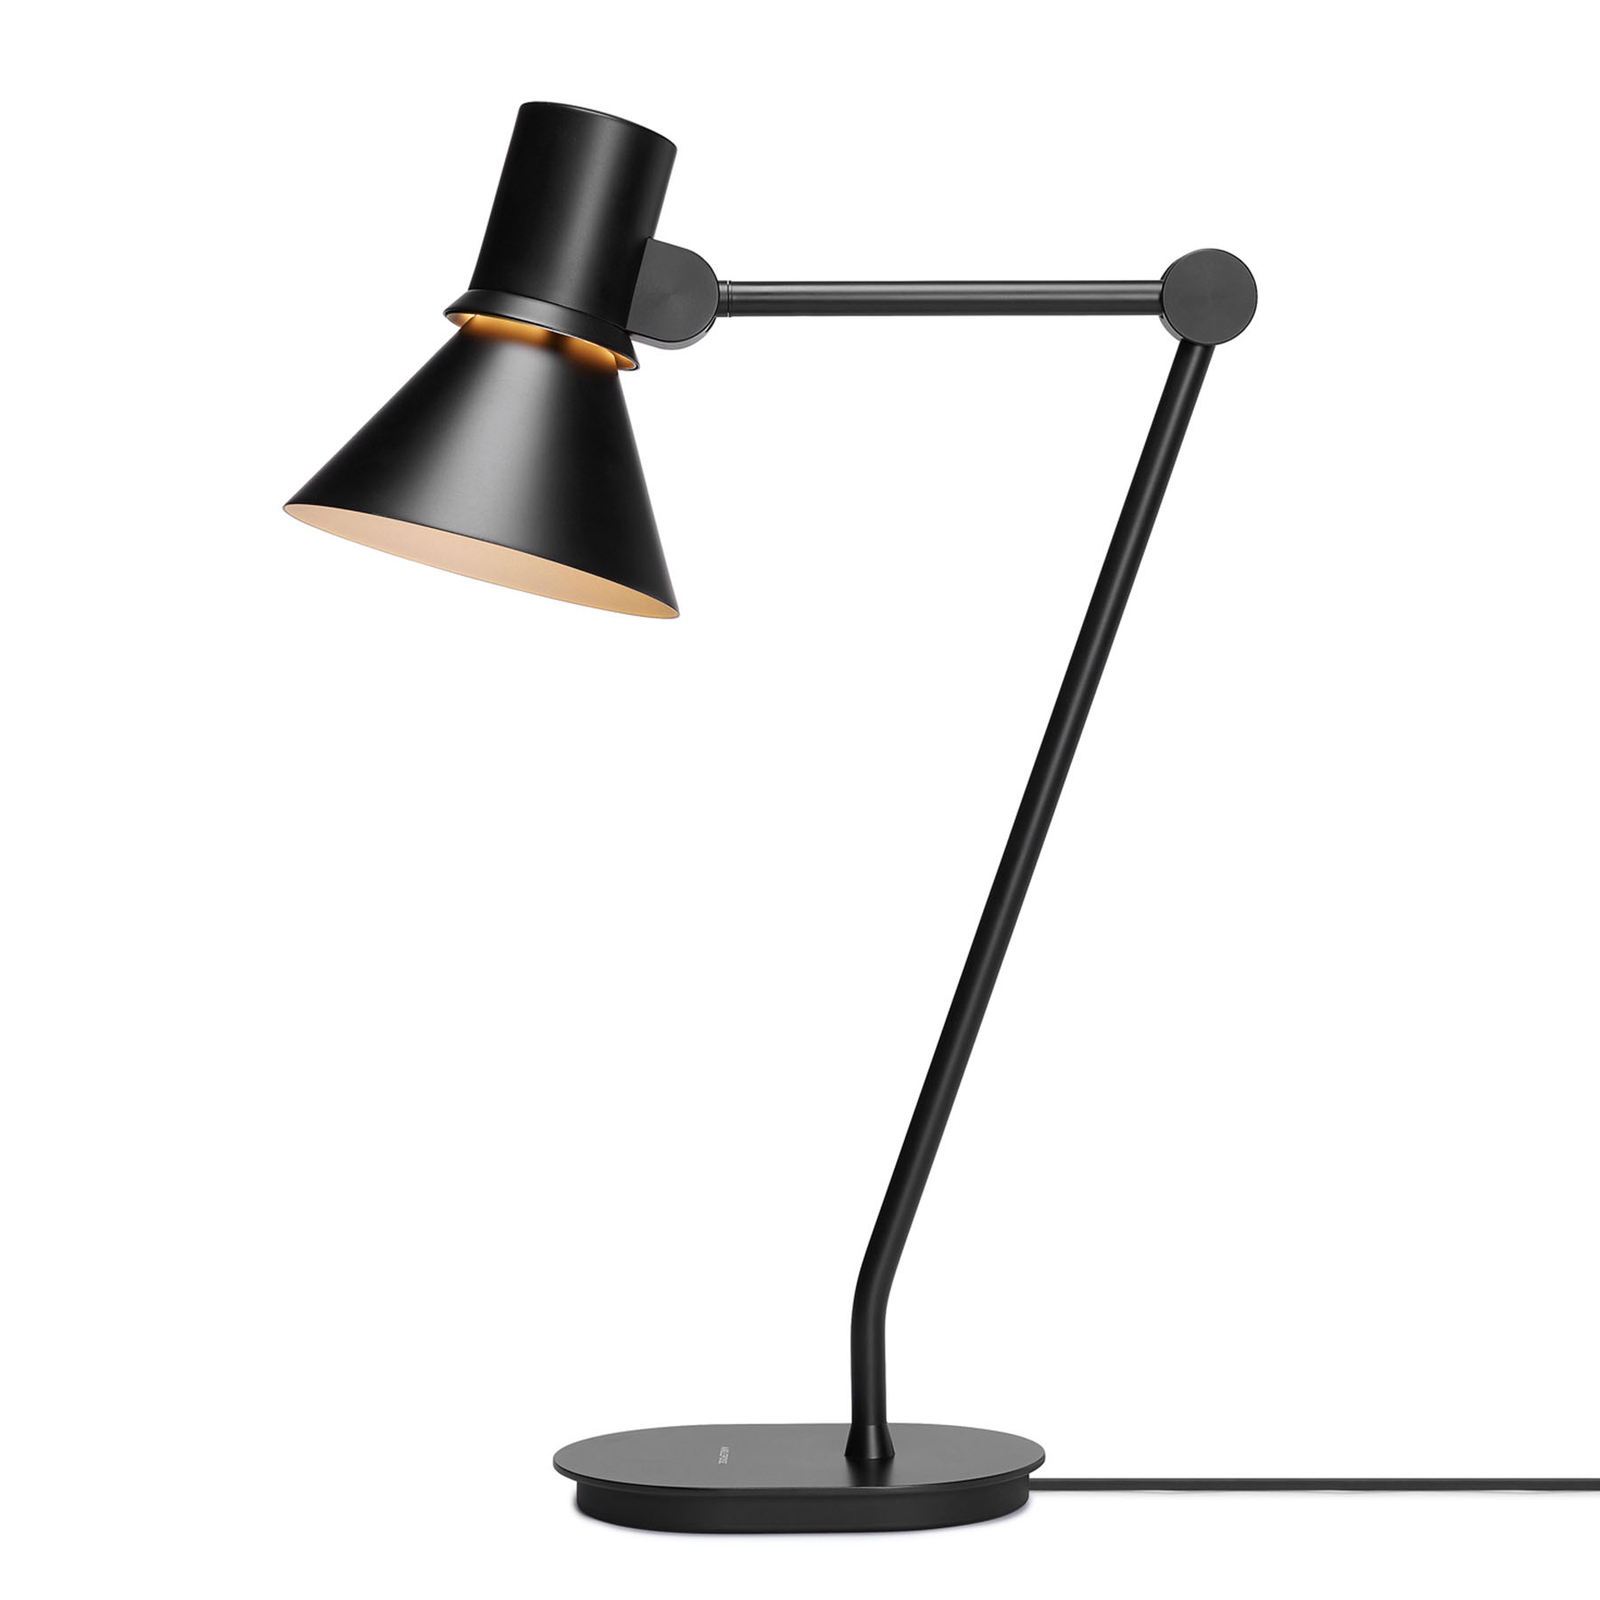 Anglepoise Type 80 lampe à poser, noire mate